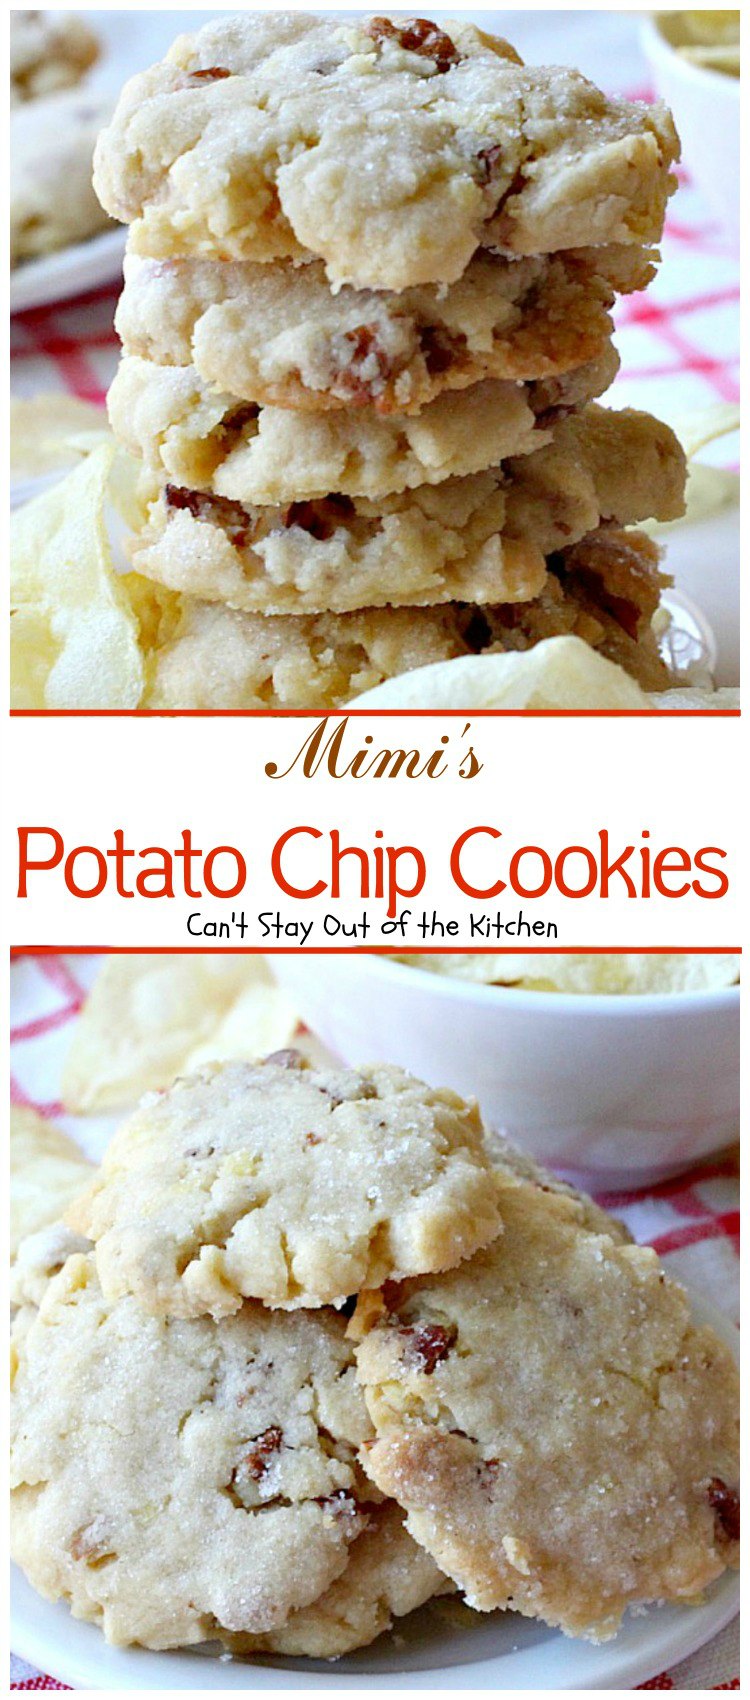 Mimi's Potato Chip Cookies | Can't Stay Out of the Kitchen